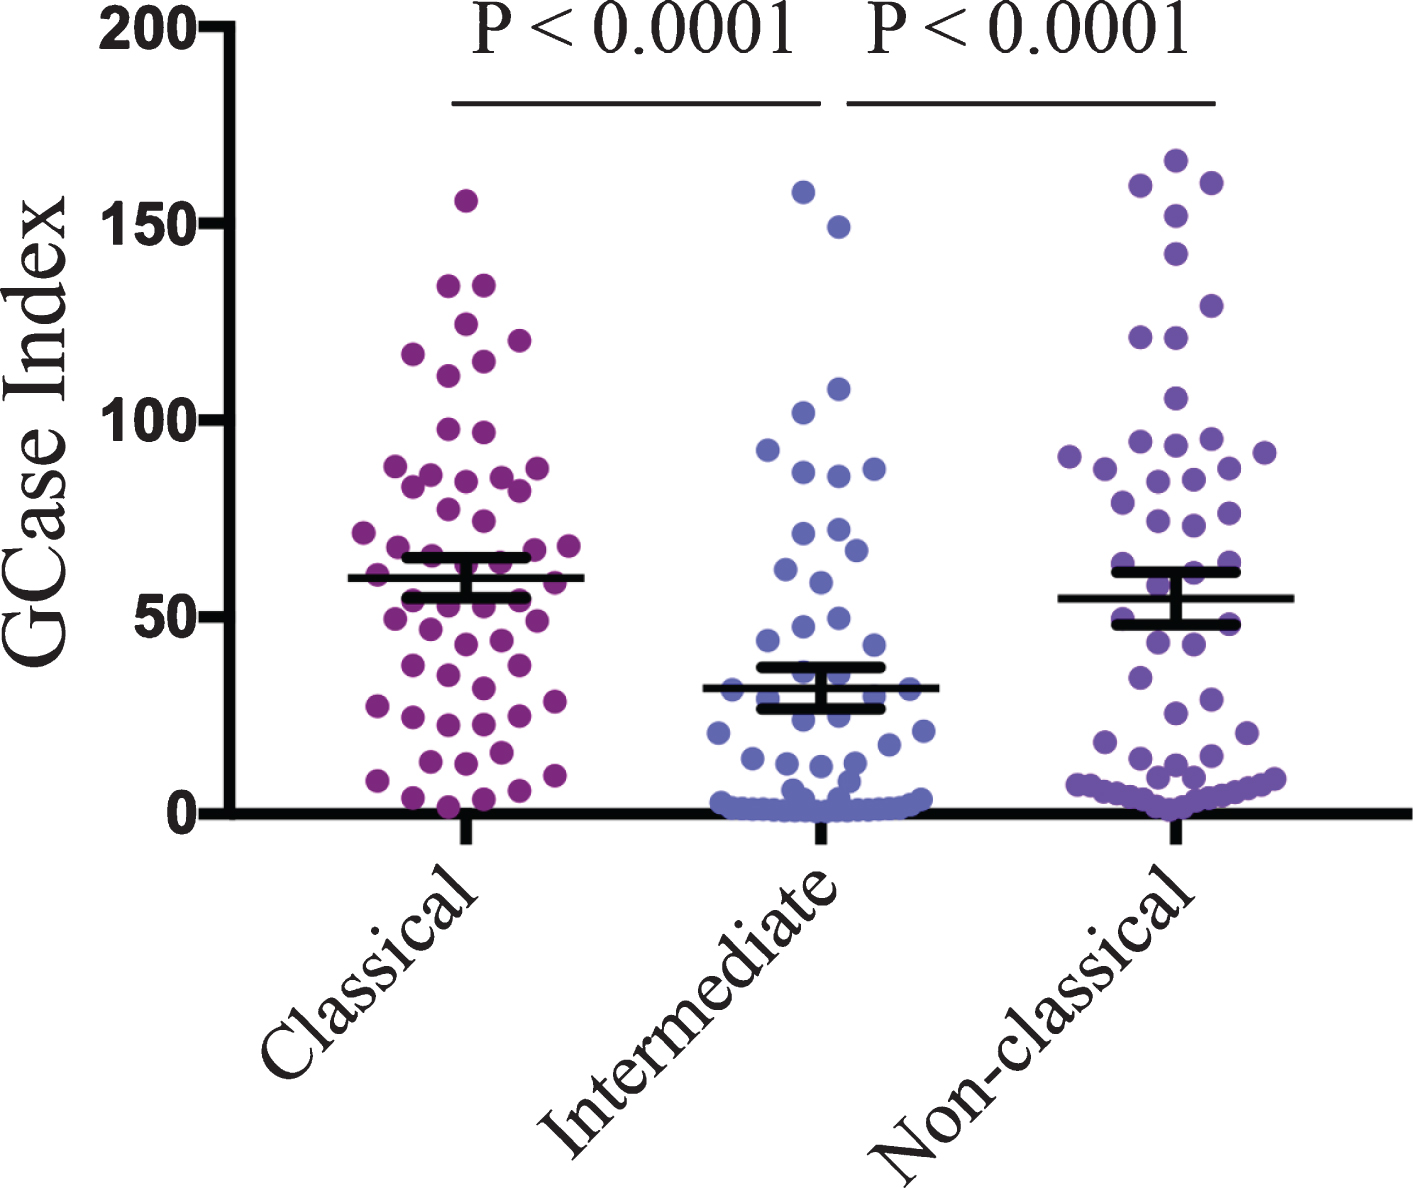 Reduced GCase activity in intermediate monocytes. GCase activity in classical, intermediate, and non-classical monocyte subsets across the whole cohort (n = 56) was compared using a one-way ANOVA with Tukey’s multiple comparison post hoc test. Data are presented as the mean±SEM with each dot representing an individual participant.